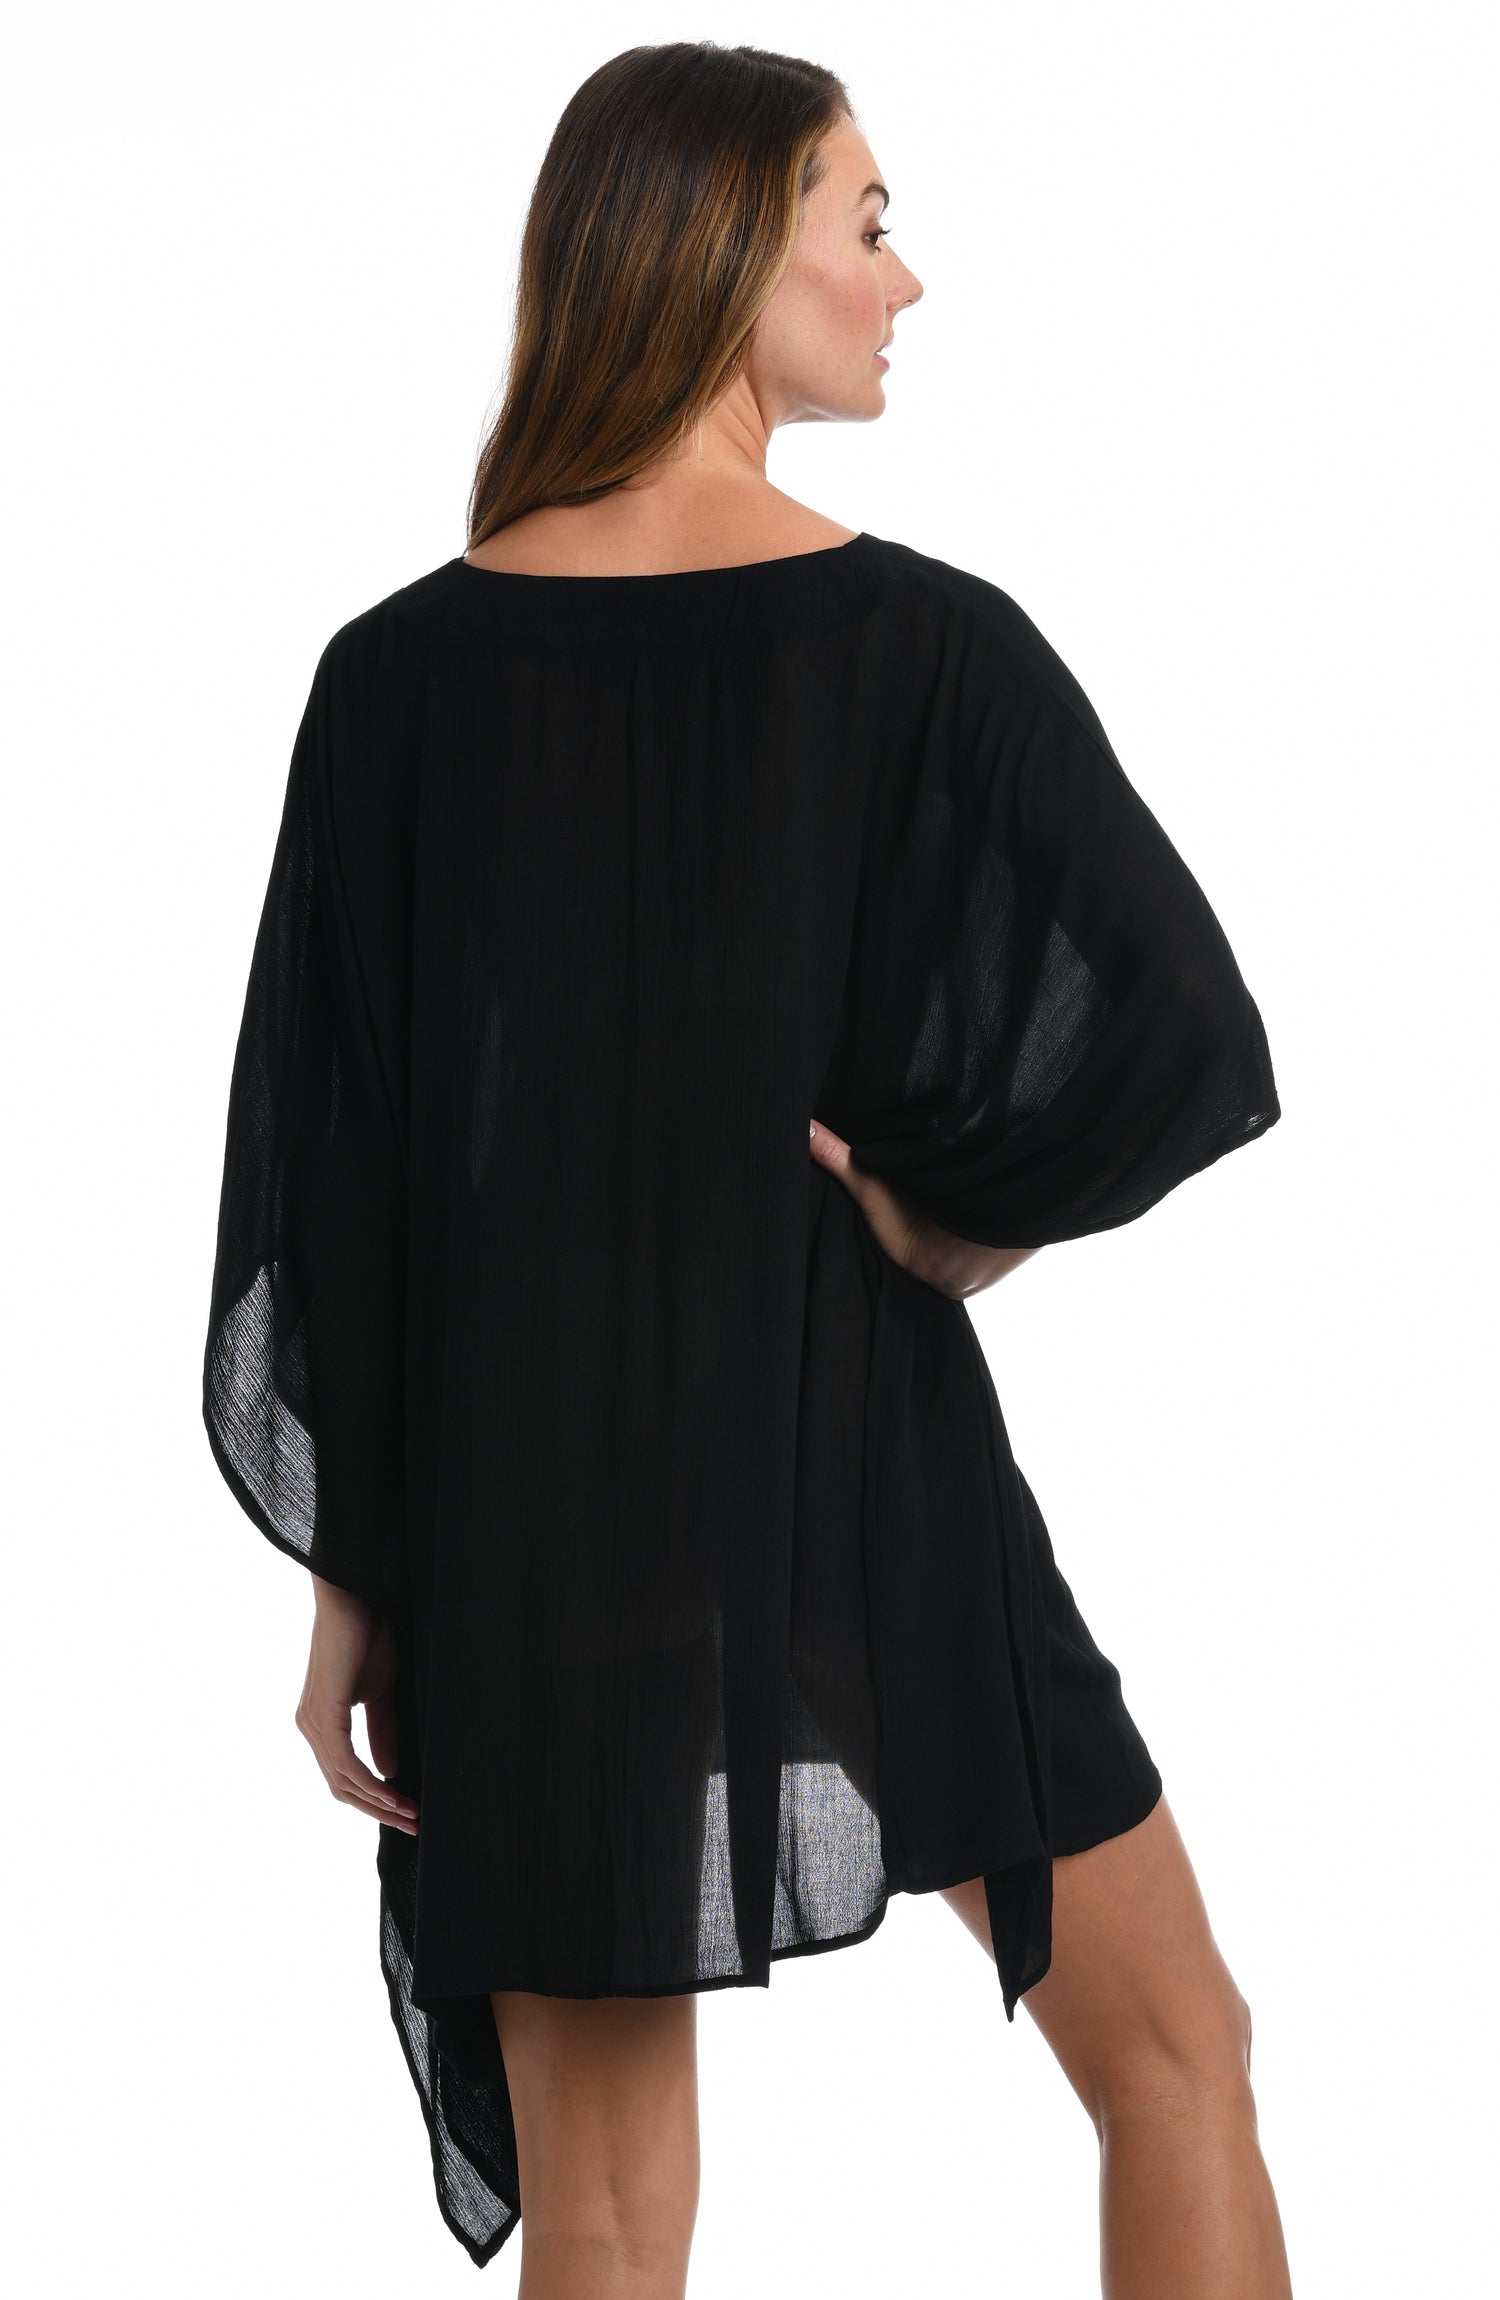 Model is wearing a black colored lace front caftan cover up fom our Apulia Mix collection.